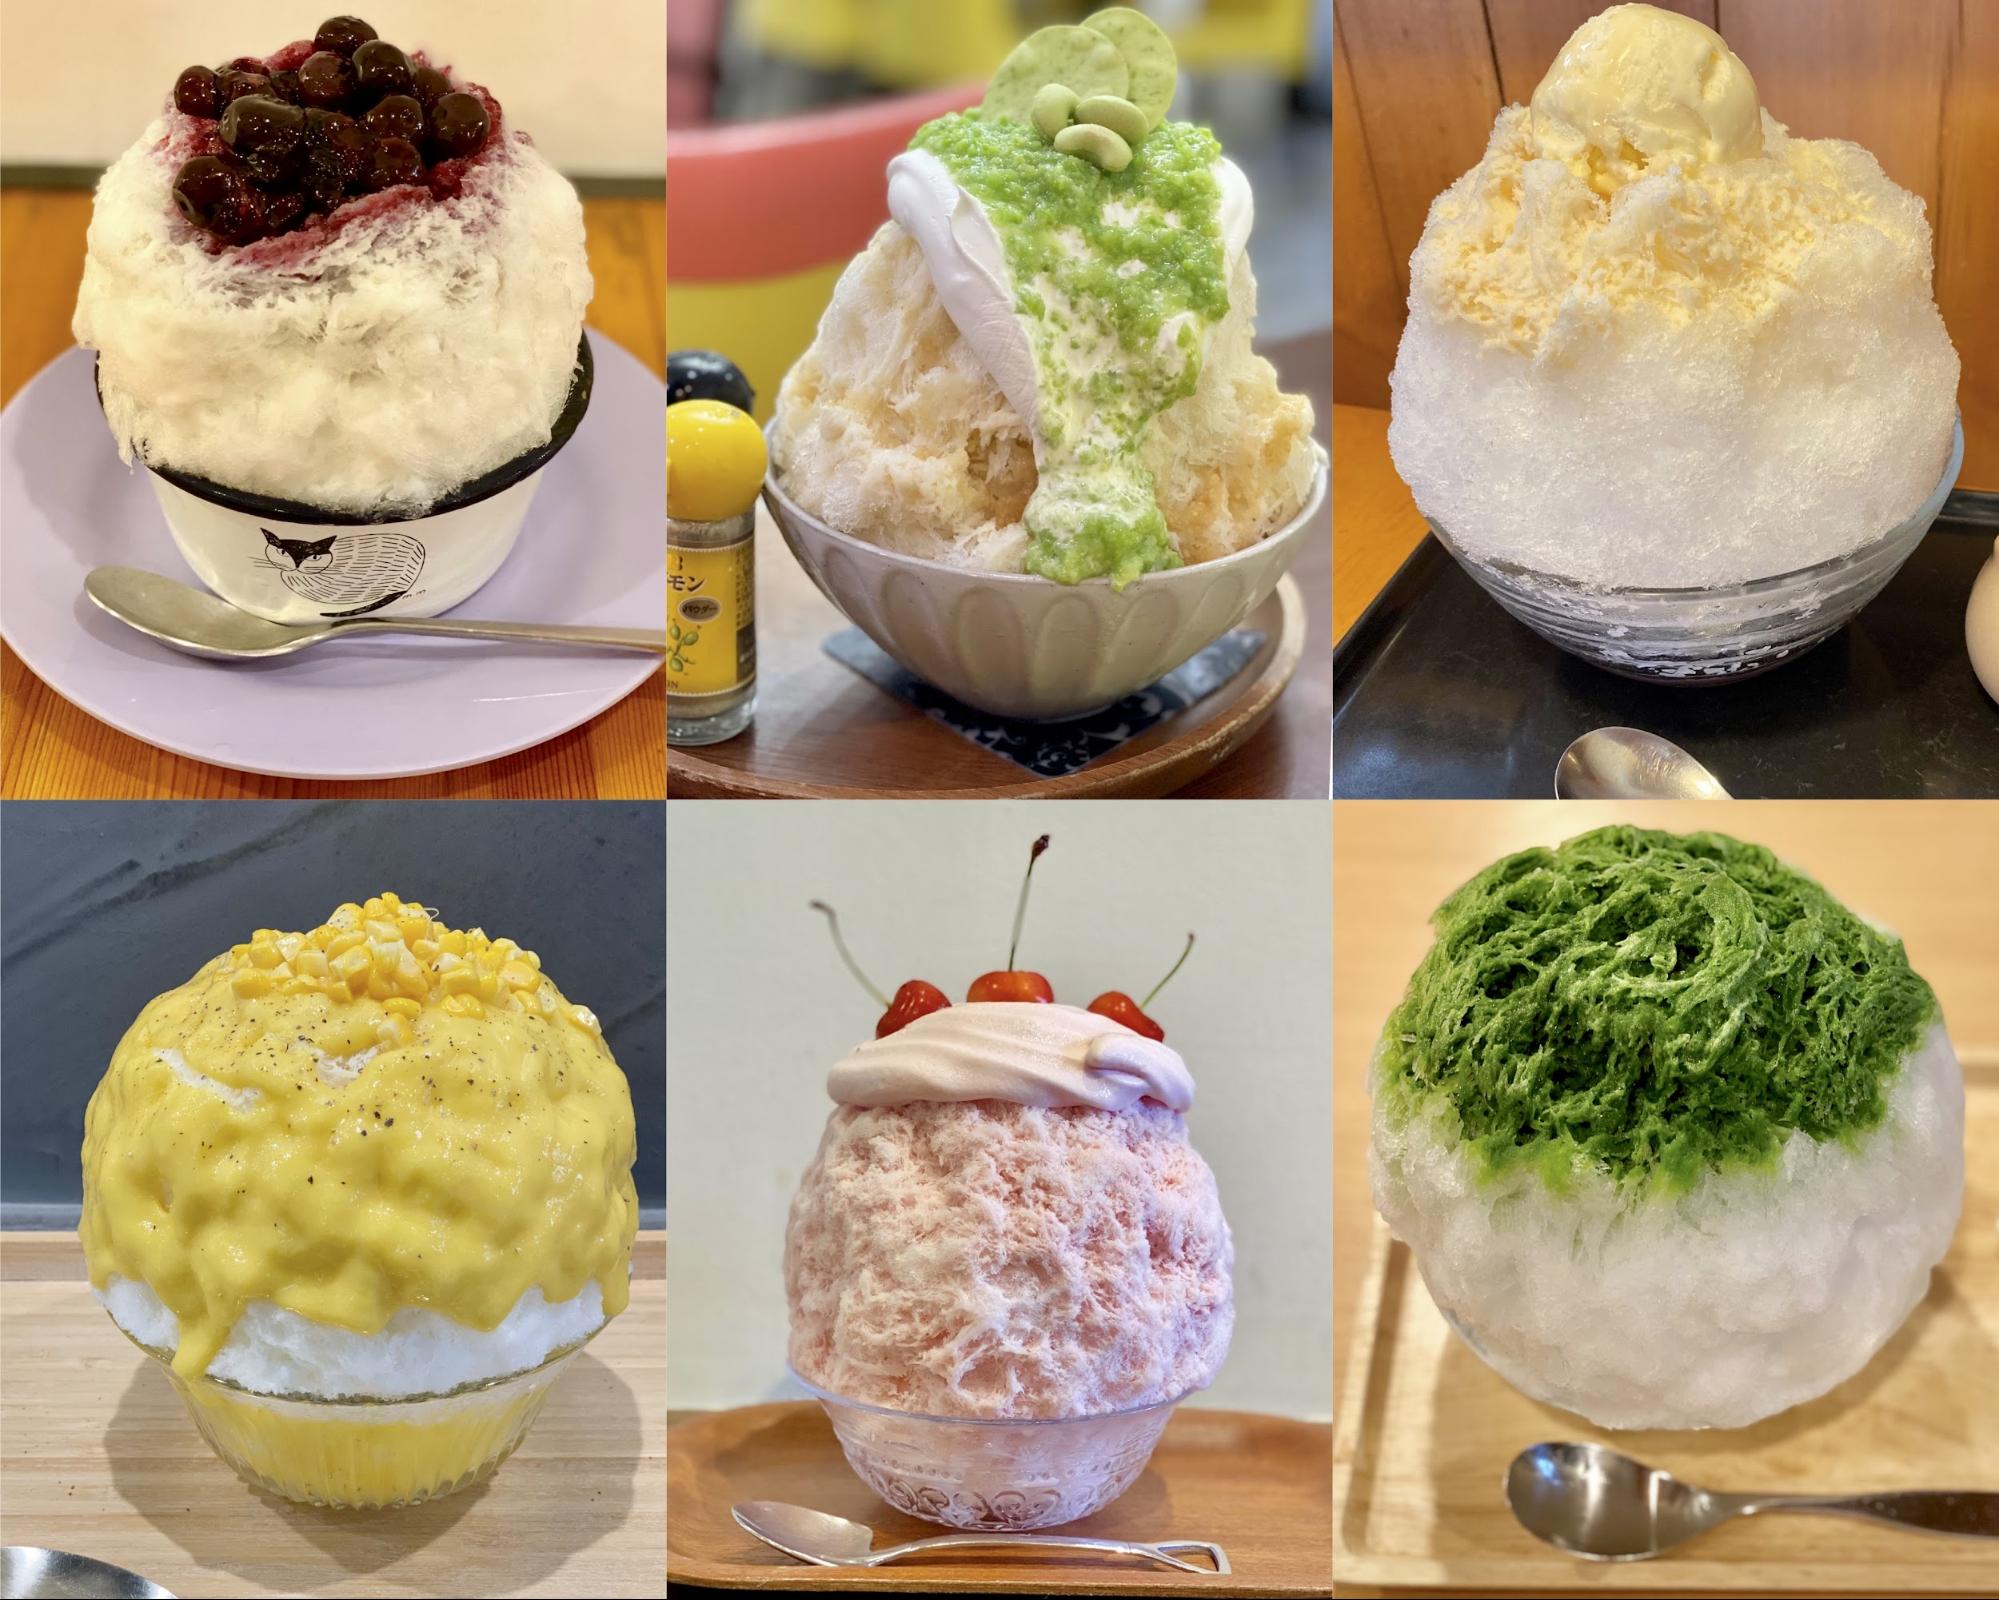 Cool and Delicious, Hot Summer Sweets! 6 Choices of Shaved Ice in Nagoya